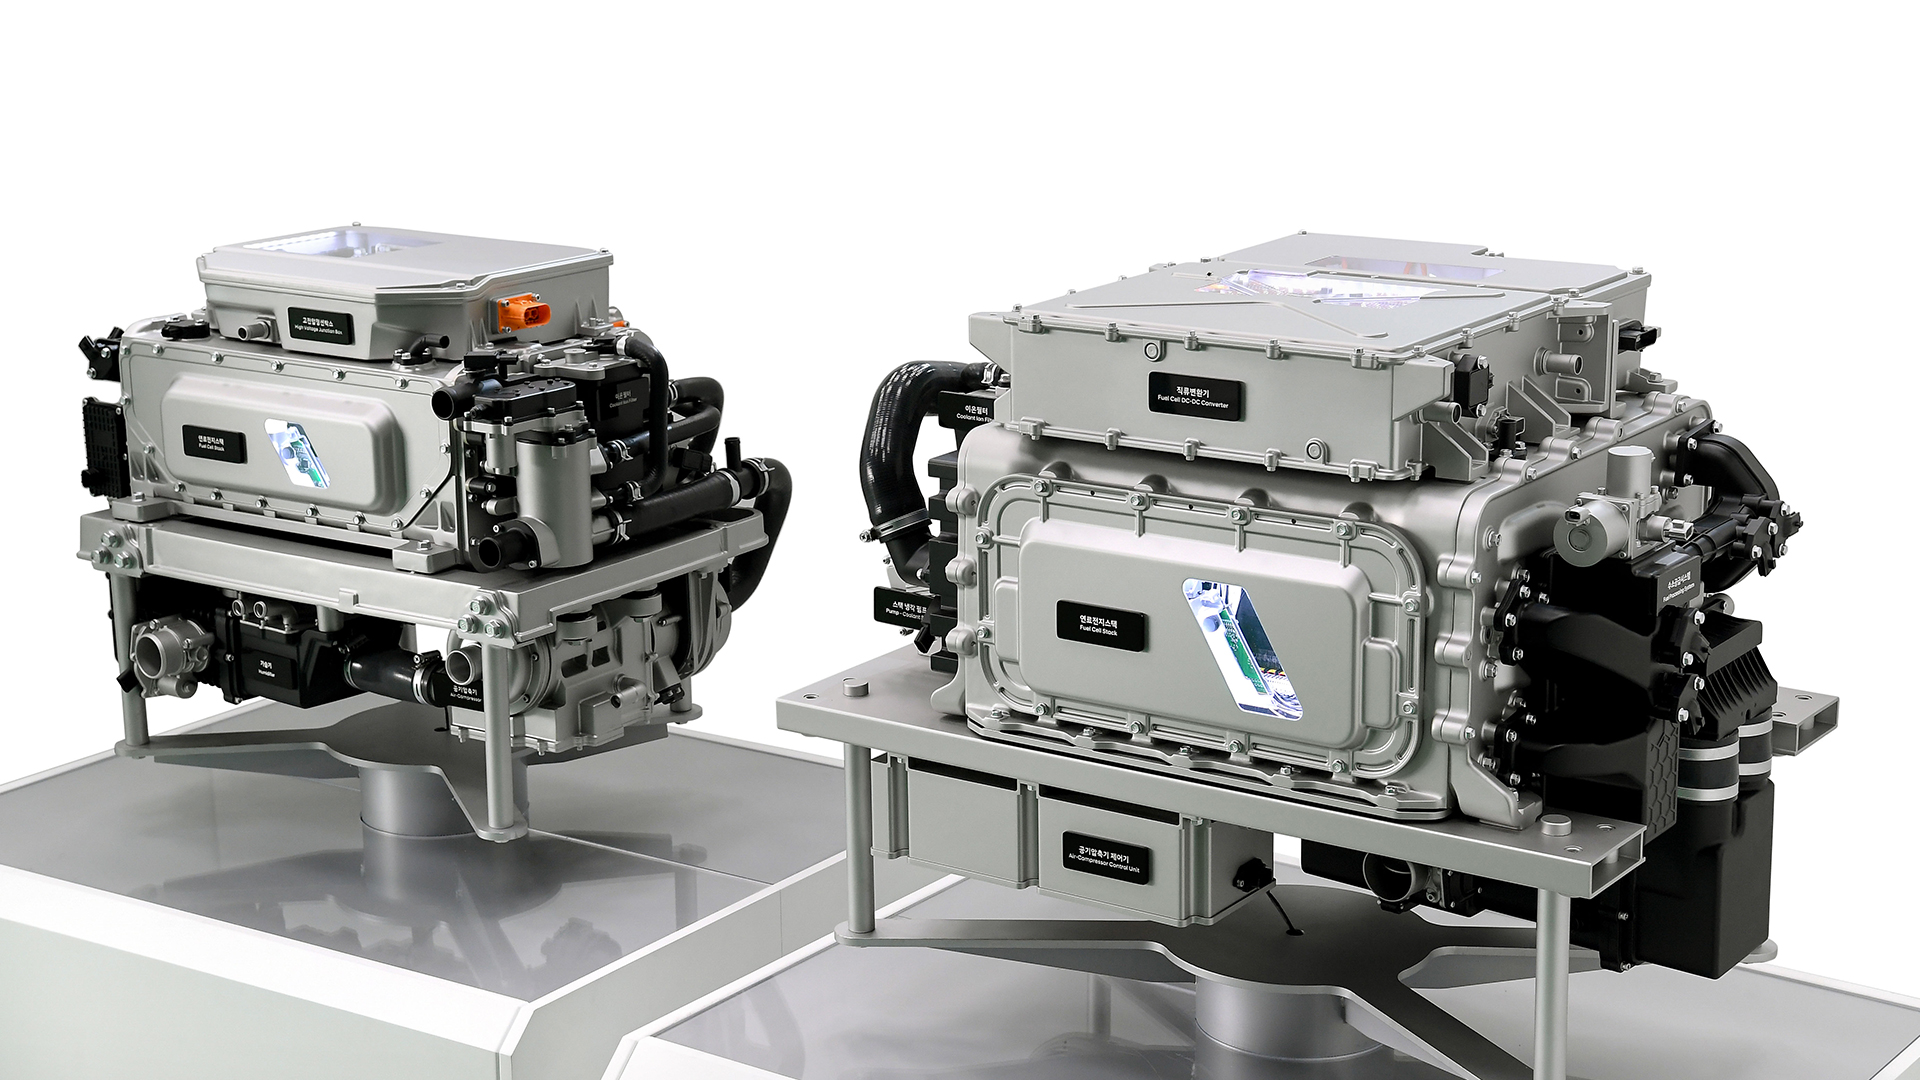 Hyundai Motor Group’s next-generation fuel cell system